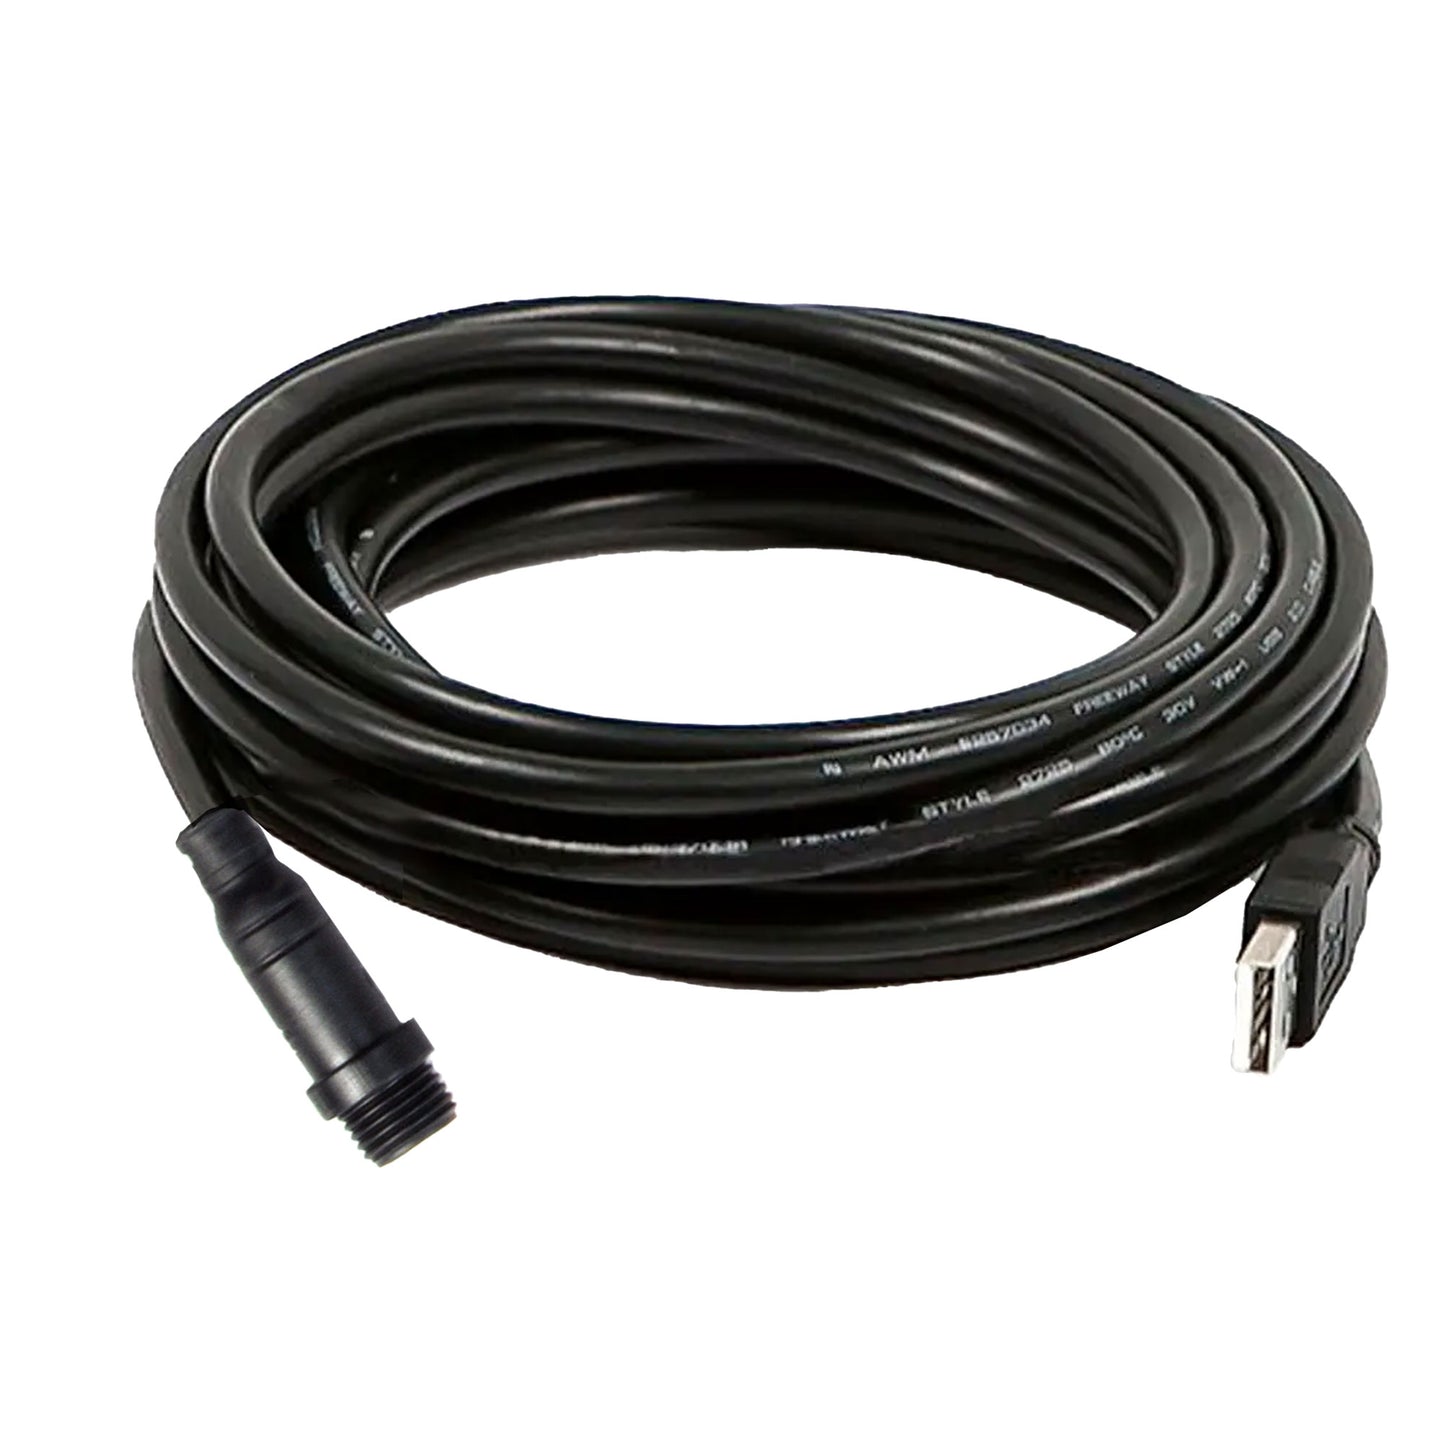 20' USB Power Cable Attachment for Instant Fountains